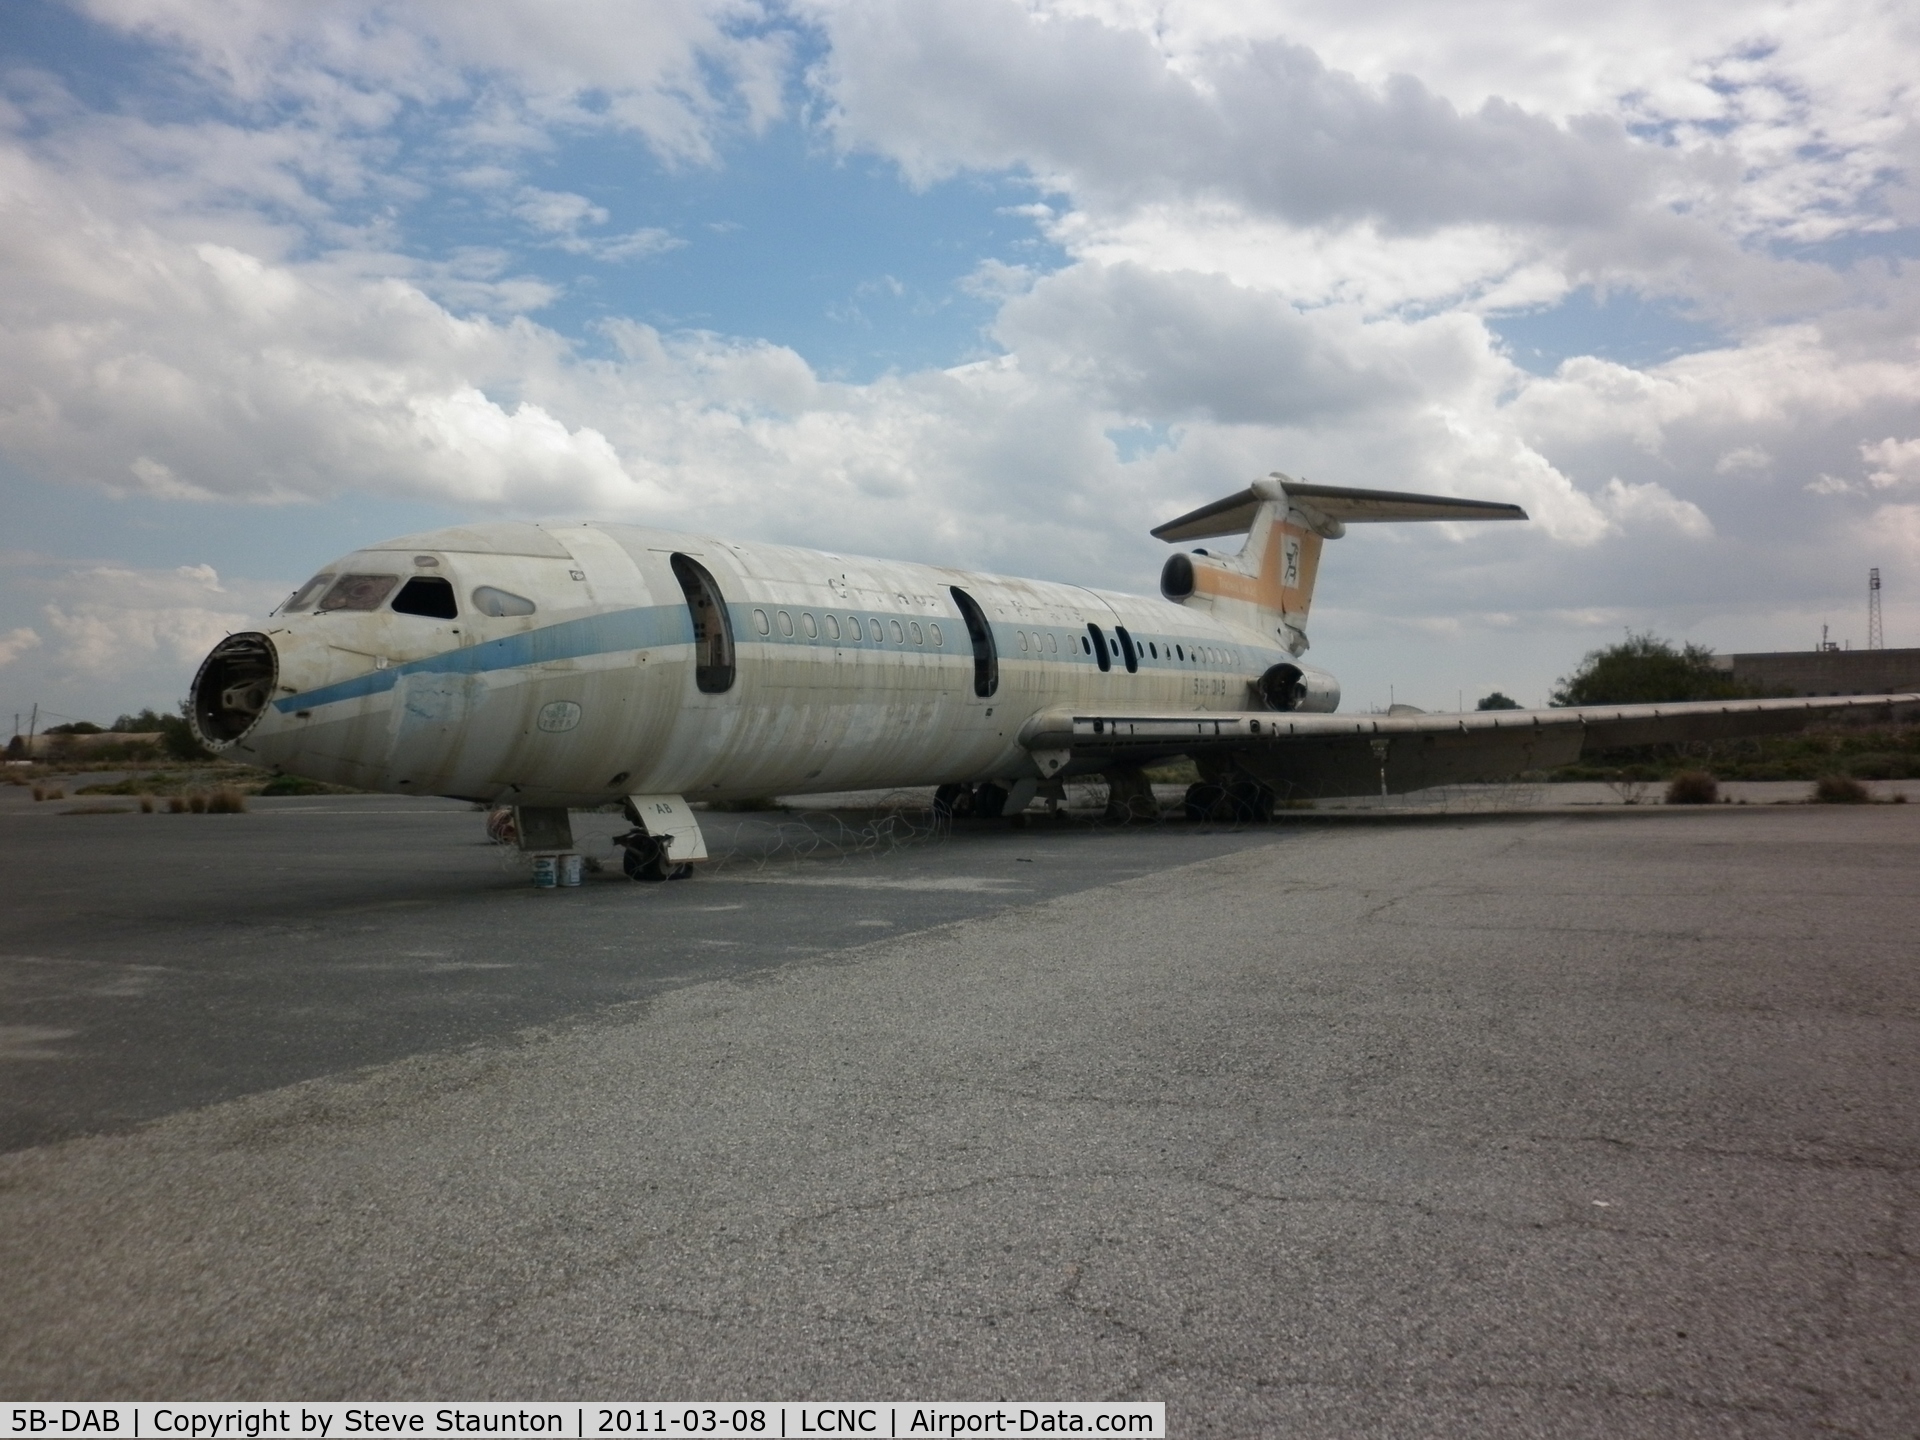 5B-DAB, 1970 Hawker Siddeley HS-121 Trident 2E C/N 2155, Slowly rotting in the Cyprus heat. Please note this aircraft cannot be seen by the public - NIC closed